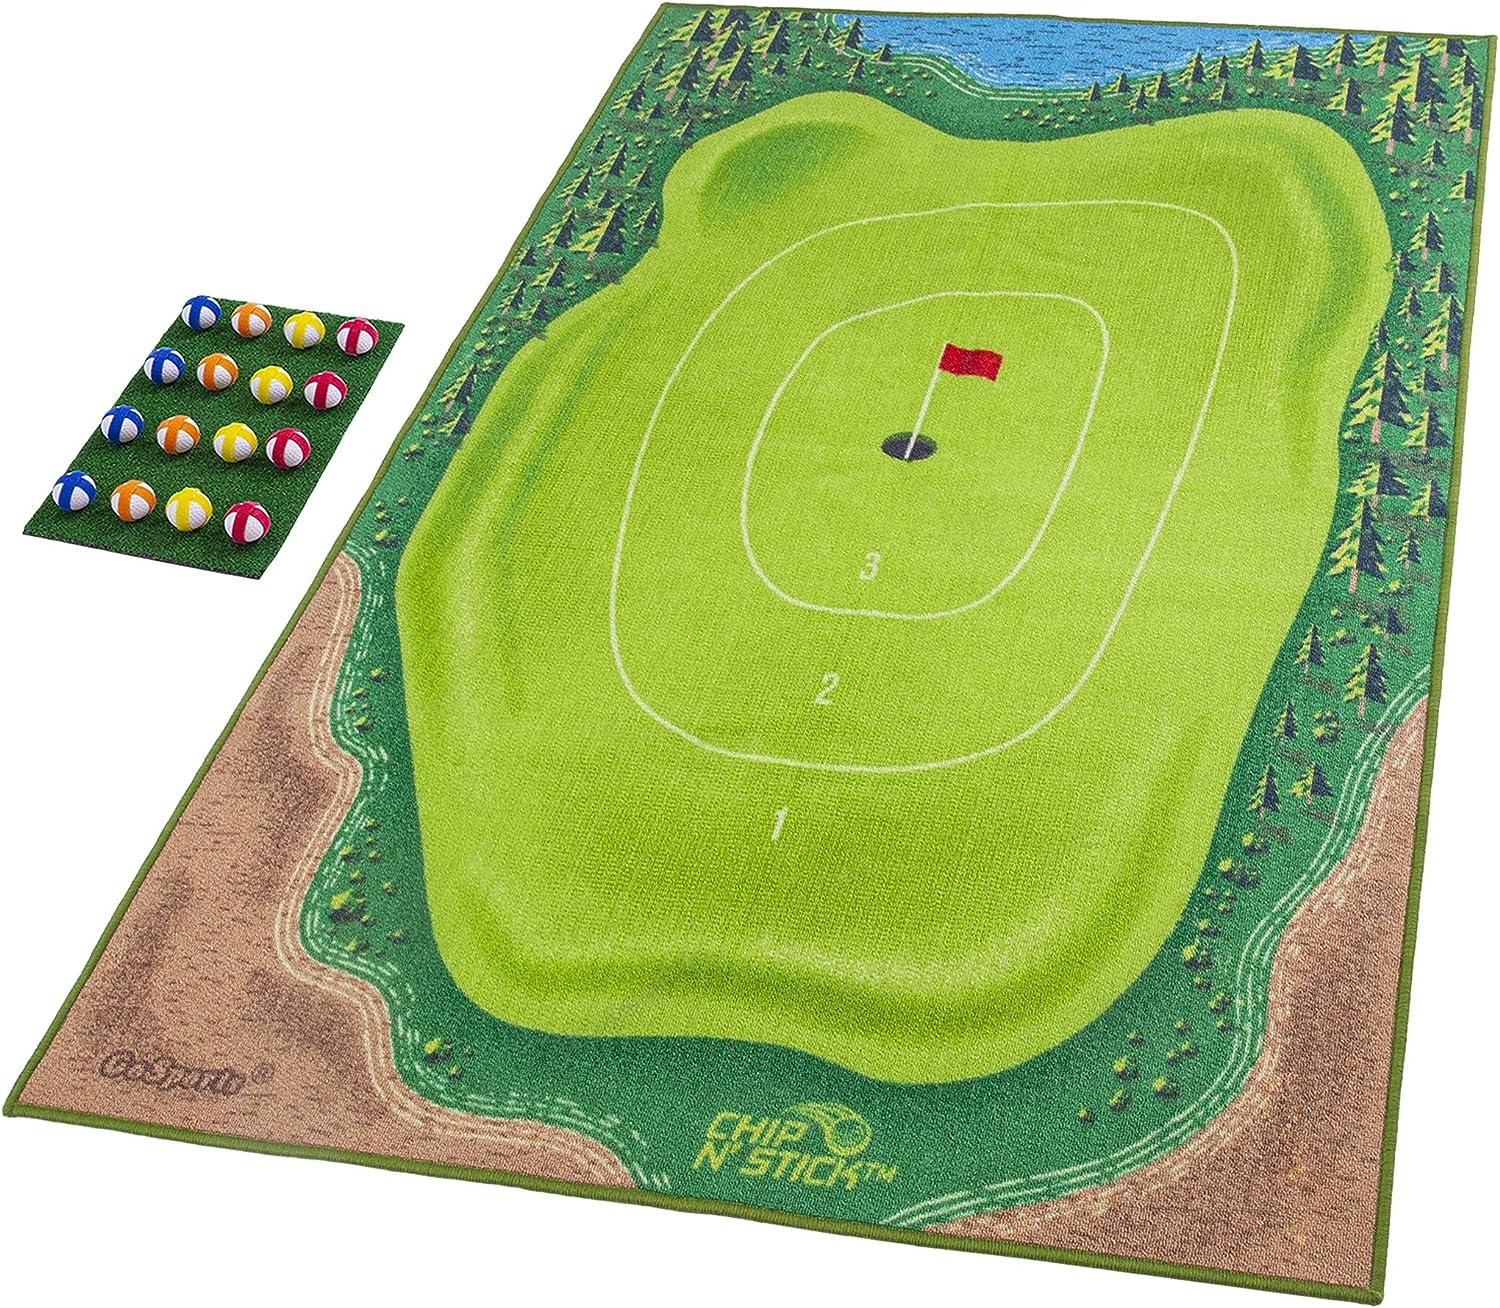 GoSports Chip N Stick Golf Games with Chip N Stick Golf Balls - Giant Size Targets with Chipping Mat - Choose Classic, Darts or Islands